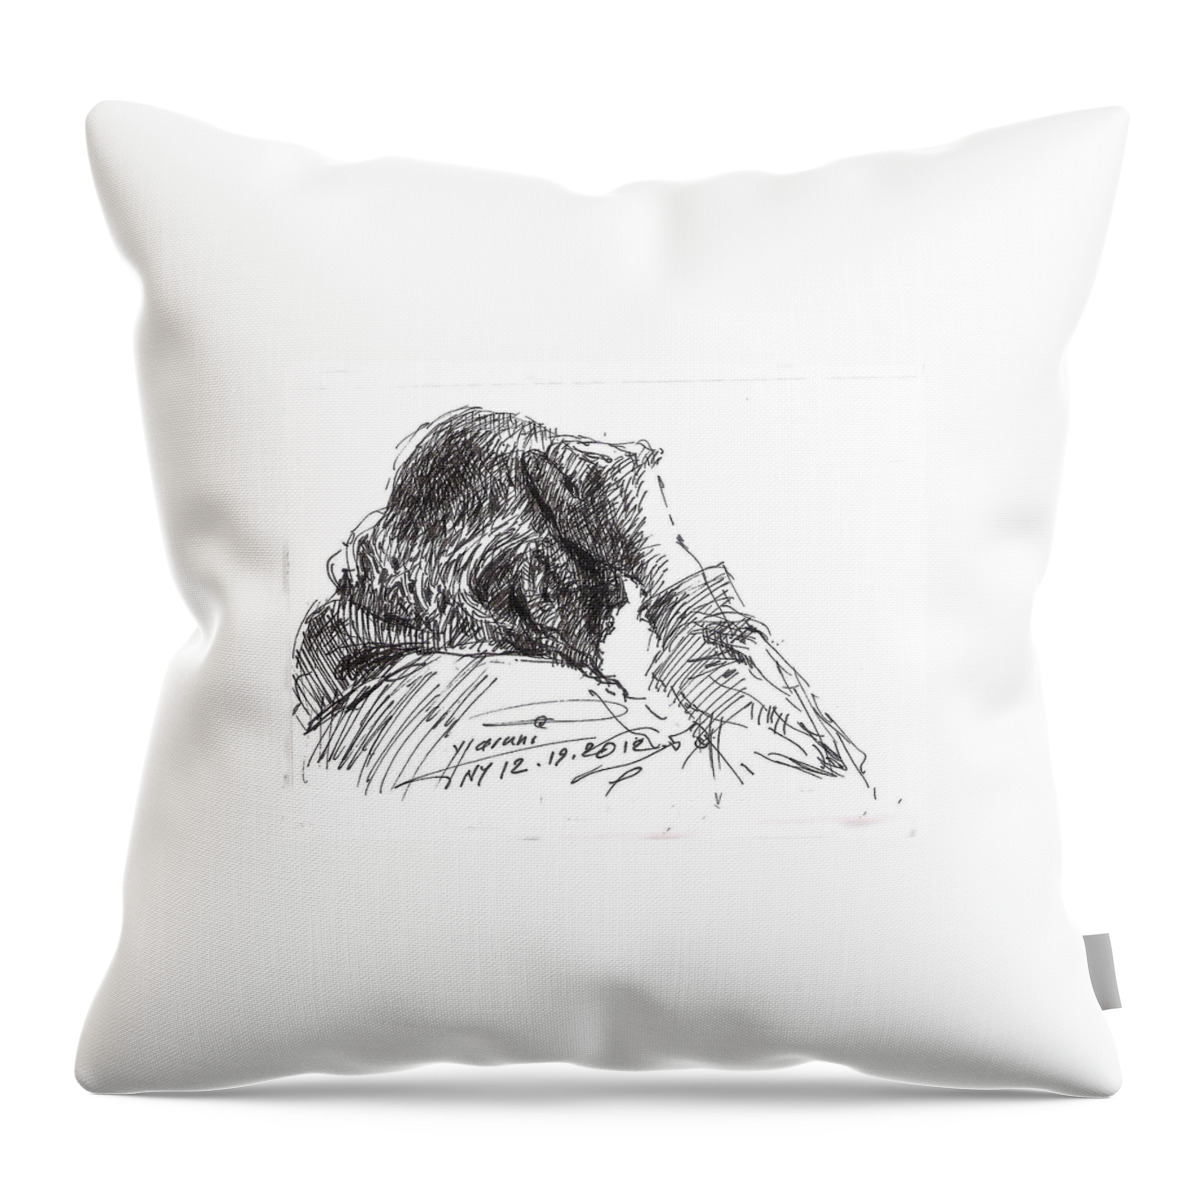 Old Man Throw Pillow featuring the drawing Old Man by Ylli Haruni